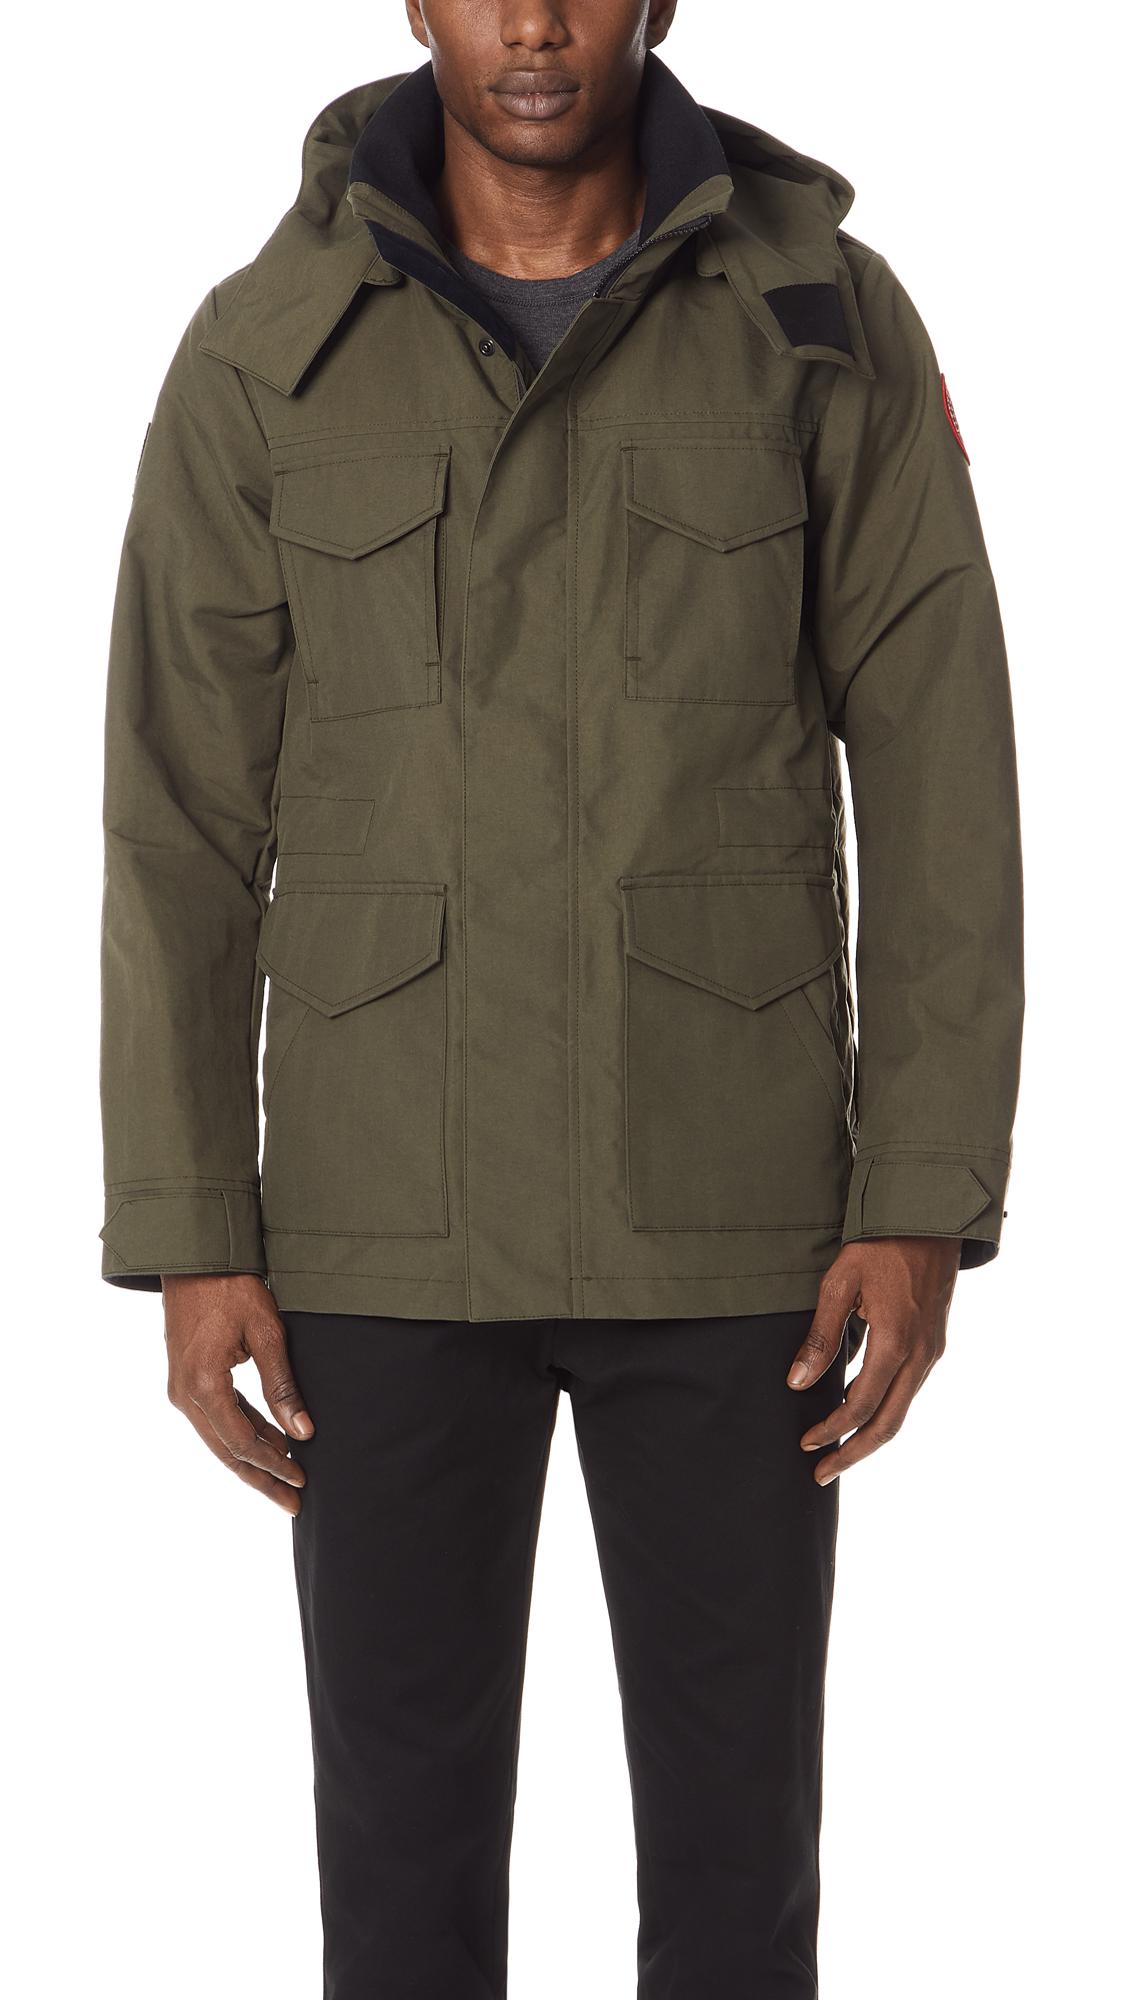 Canada Goose Synthetic Voyager Jacket in Dark Sage (Green) for Men - Lyst